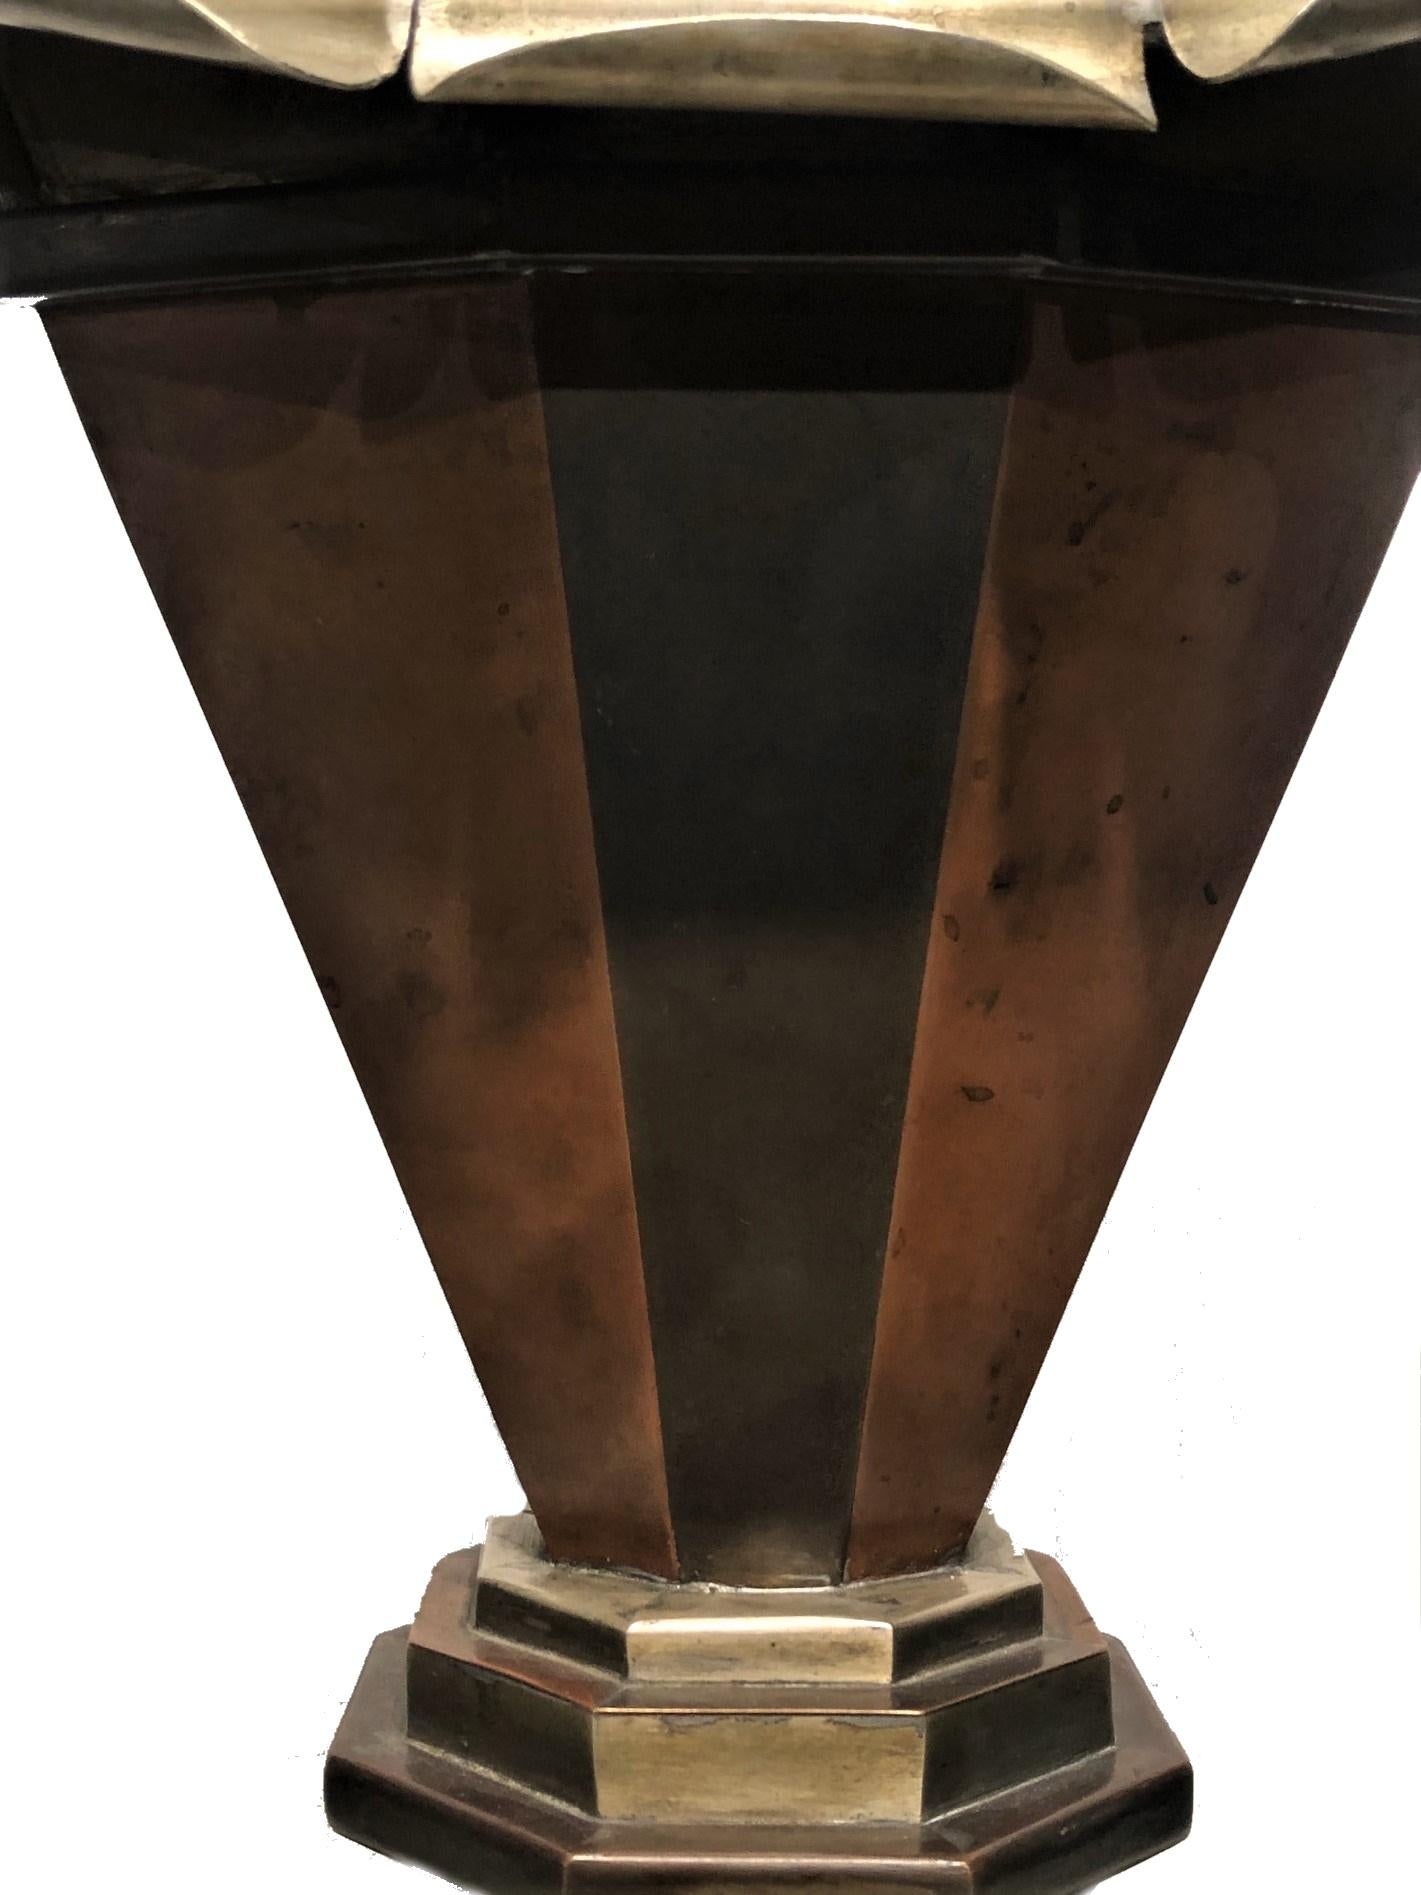 American Art Deco 
Planter with Geometrical Design
Anodized & Painted Metal
ca. 1920s

DIMENSIONS
Height: 13.5 inches
Width: 14.5 inches
Depth: 8.25 inches
